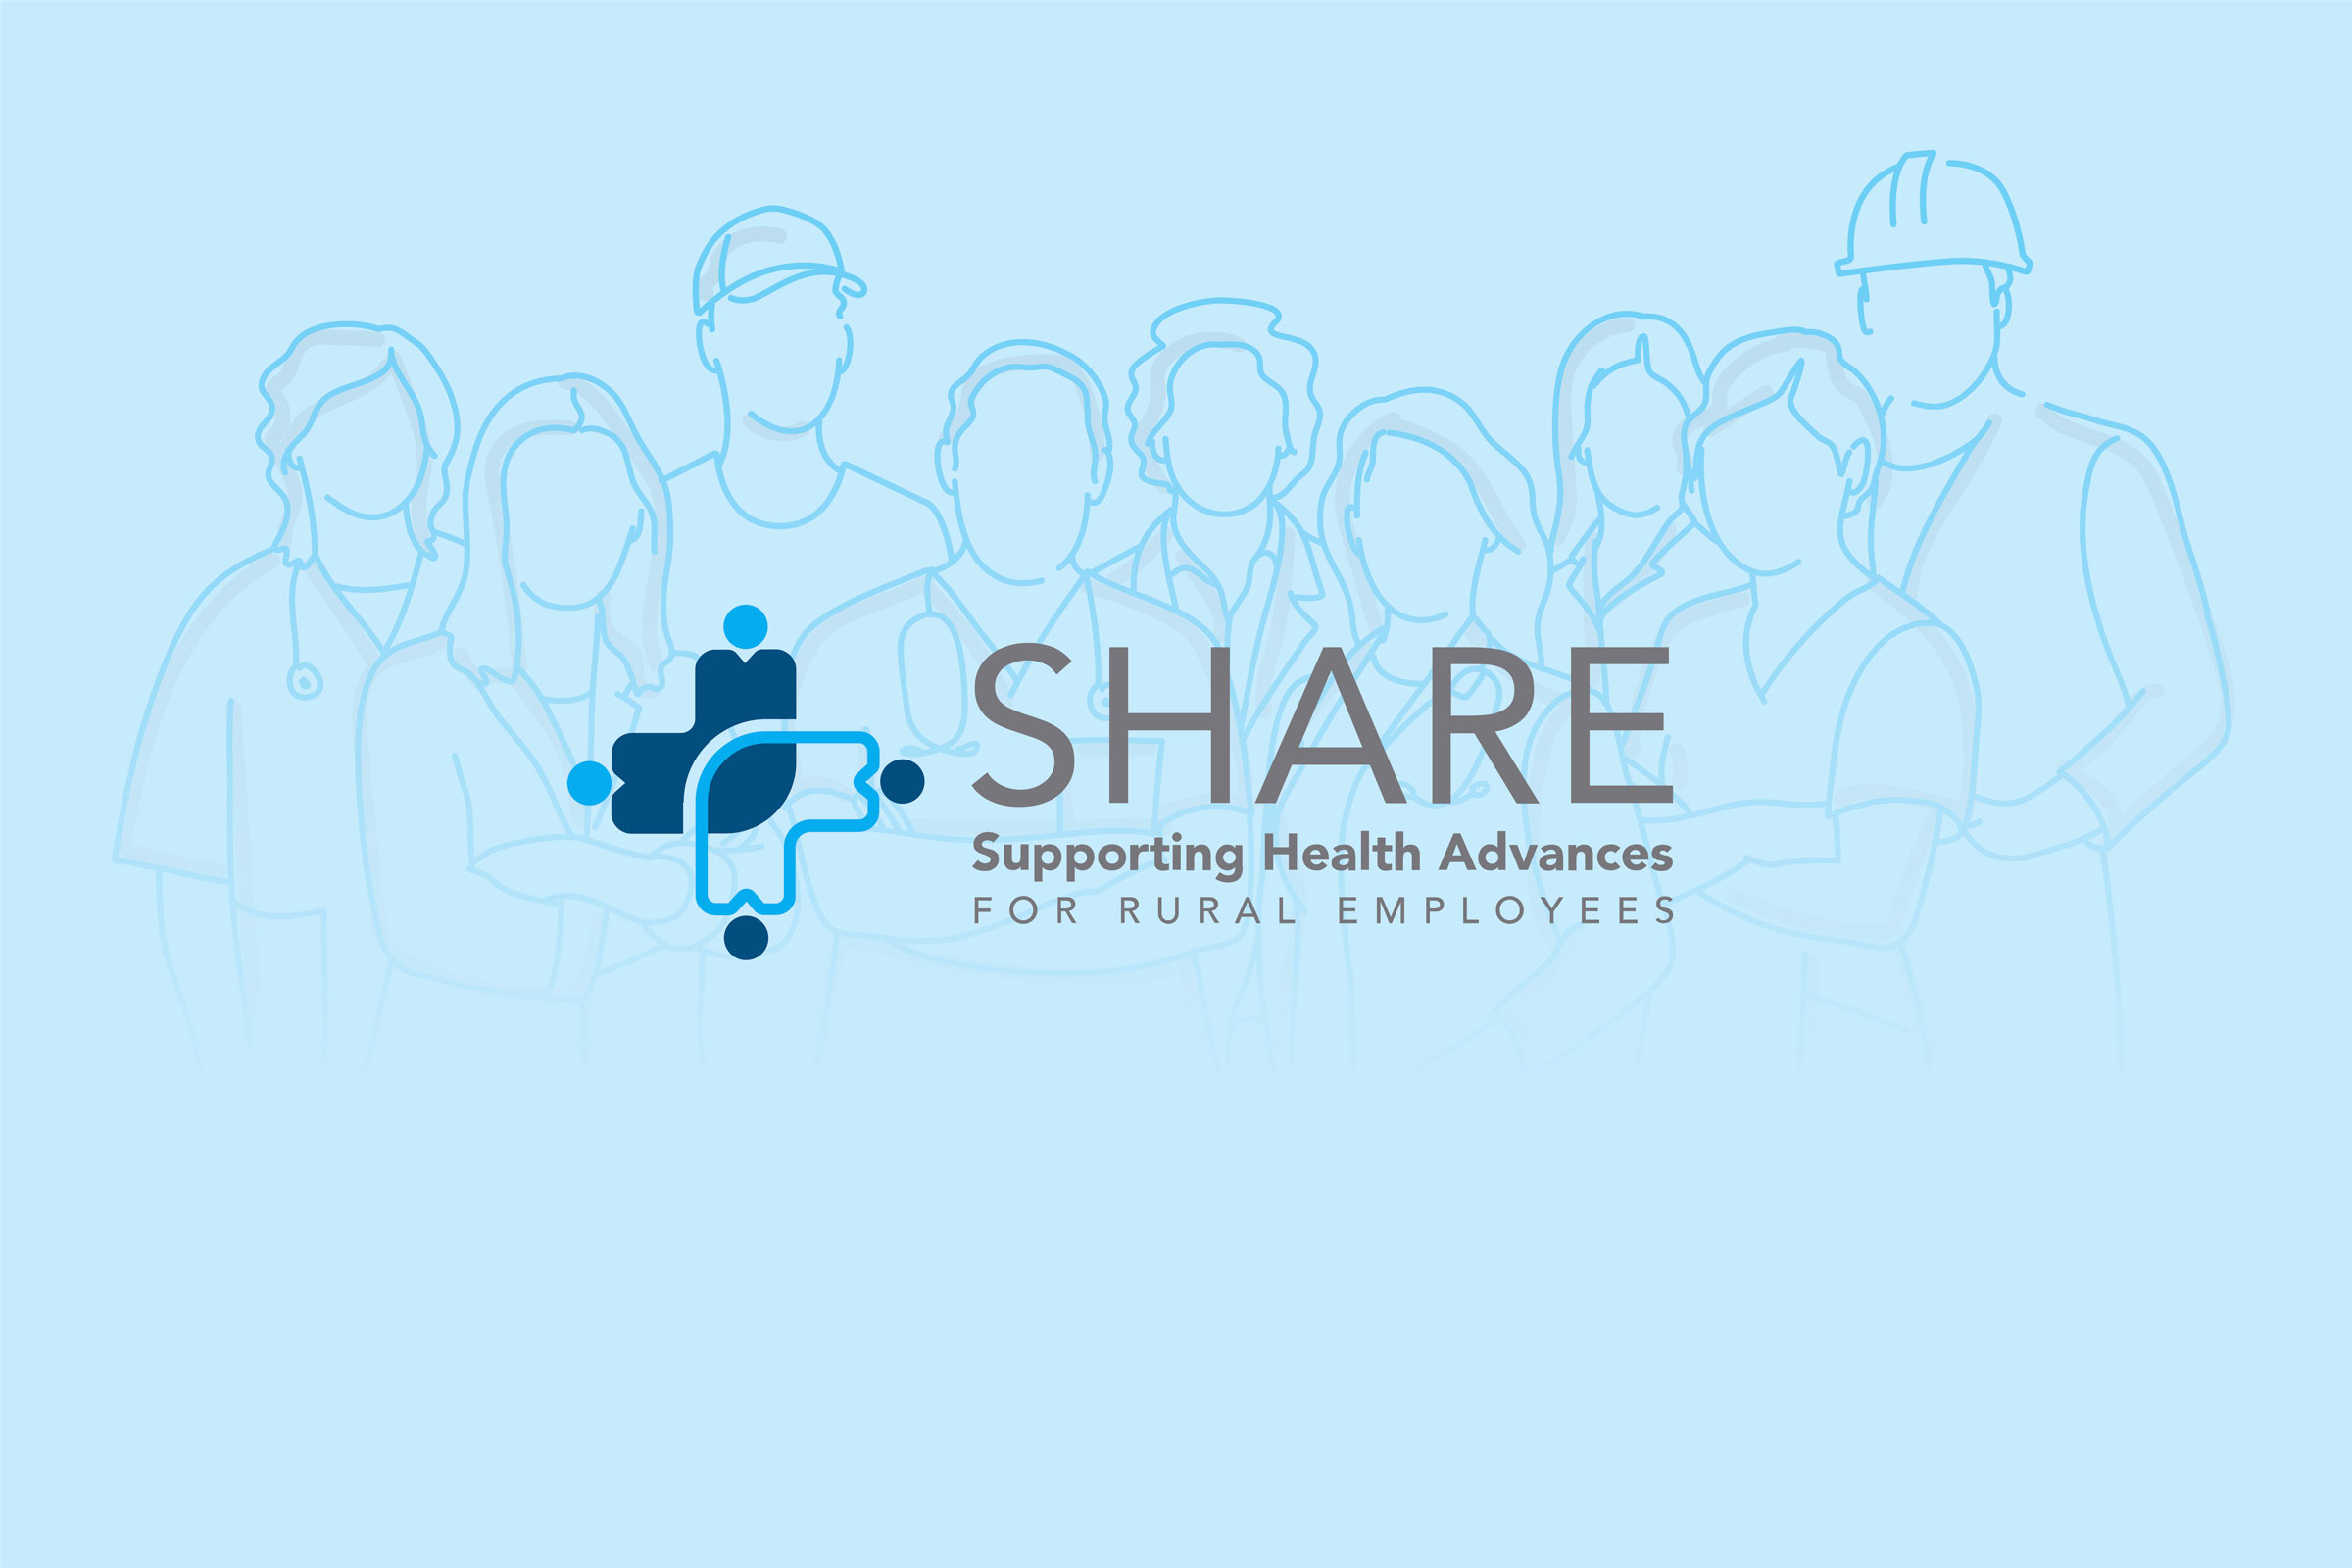 Supporting Health Advances for Rural Employees (SHARE I and SHARE II)